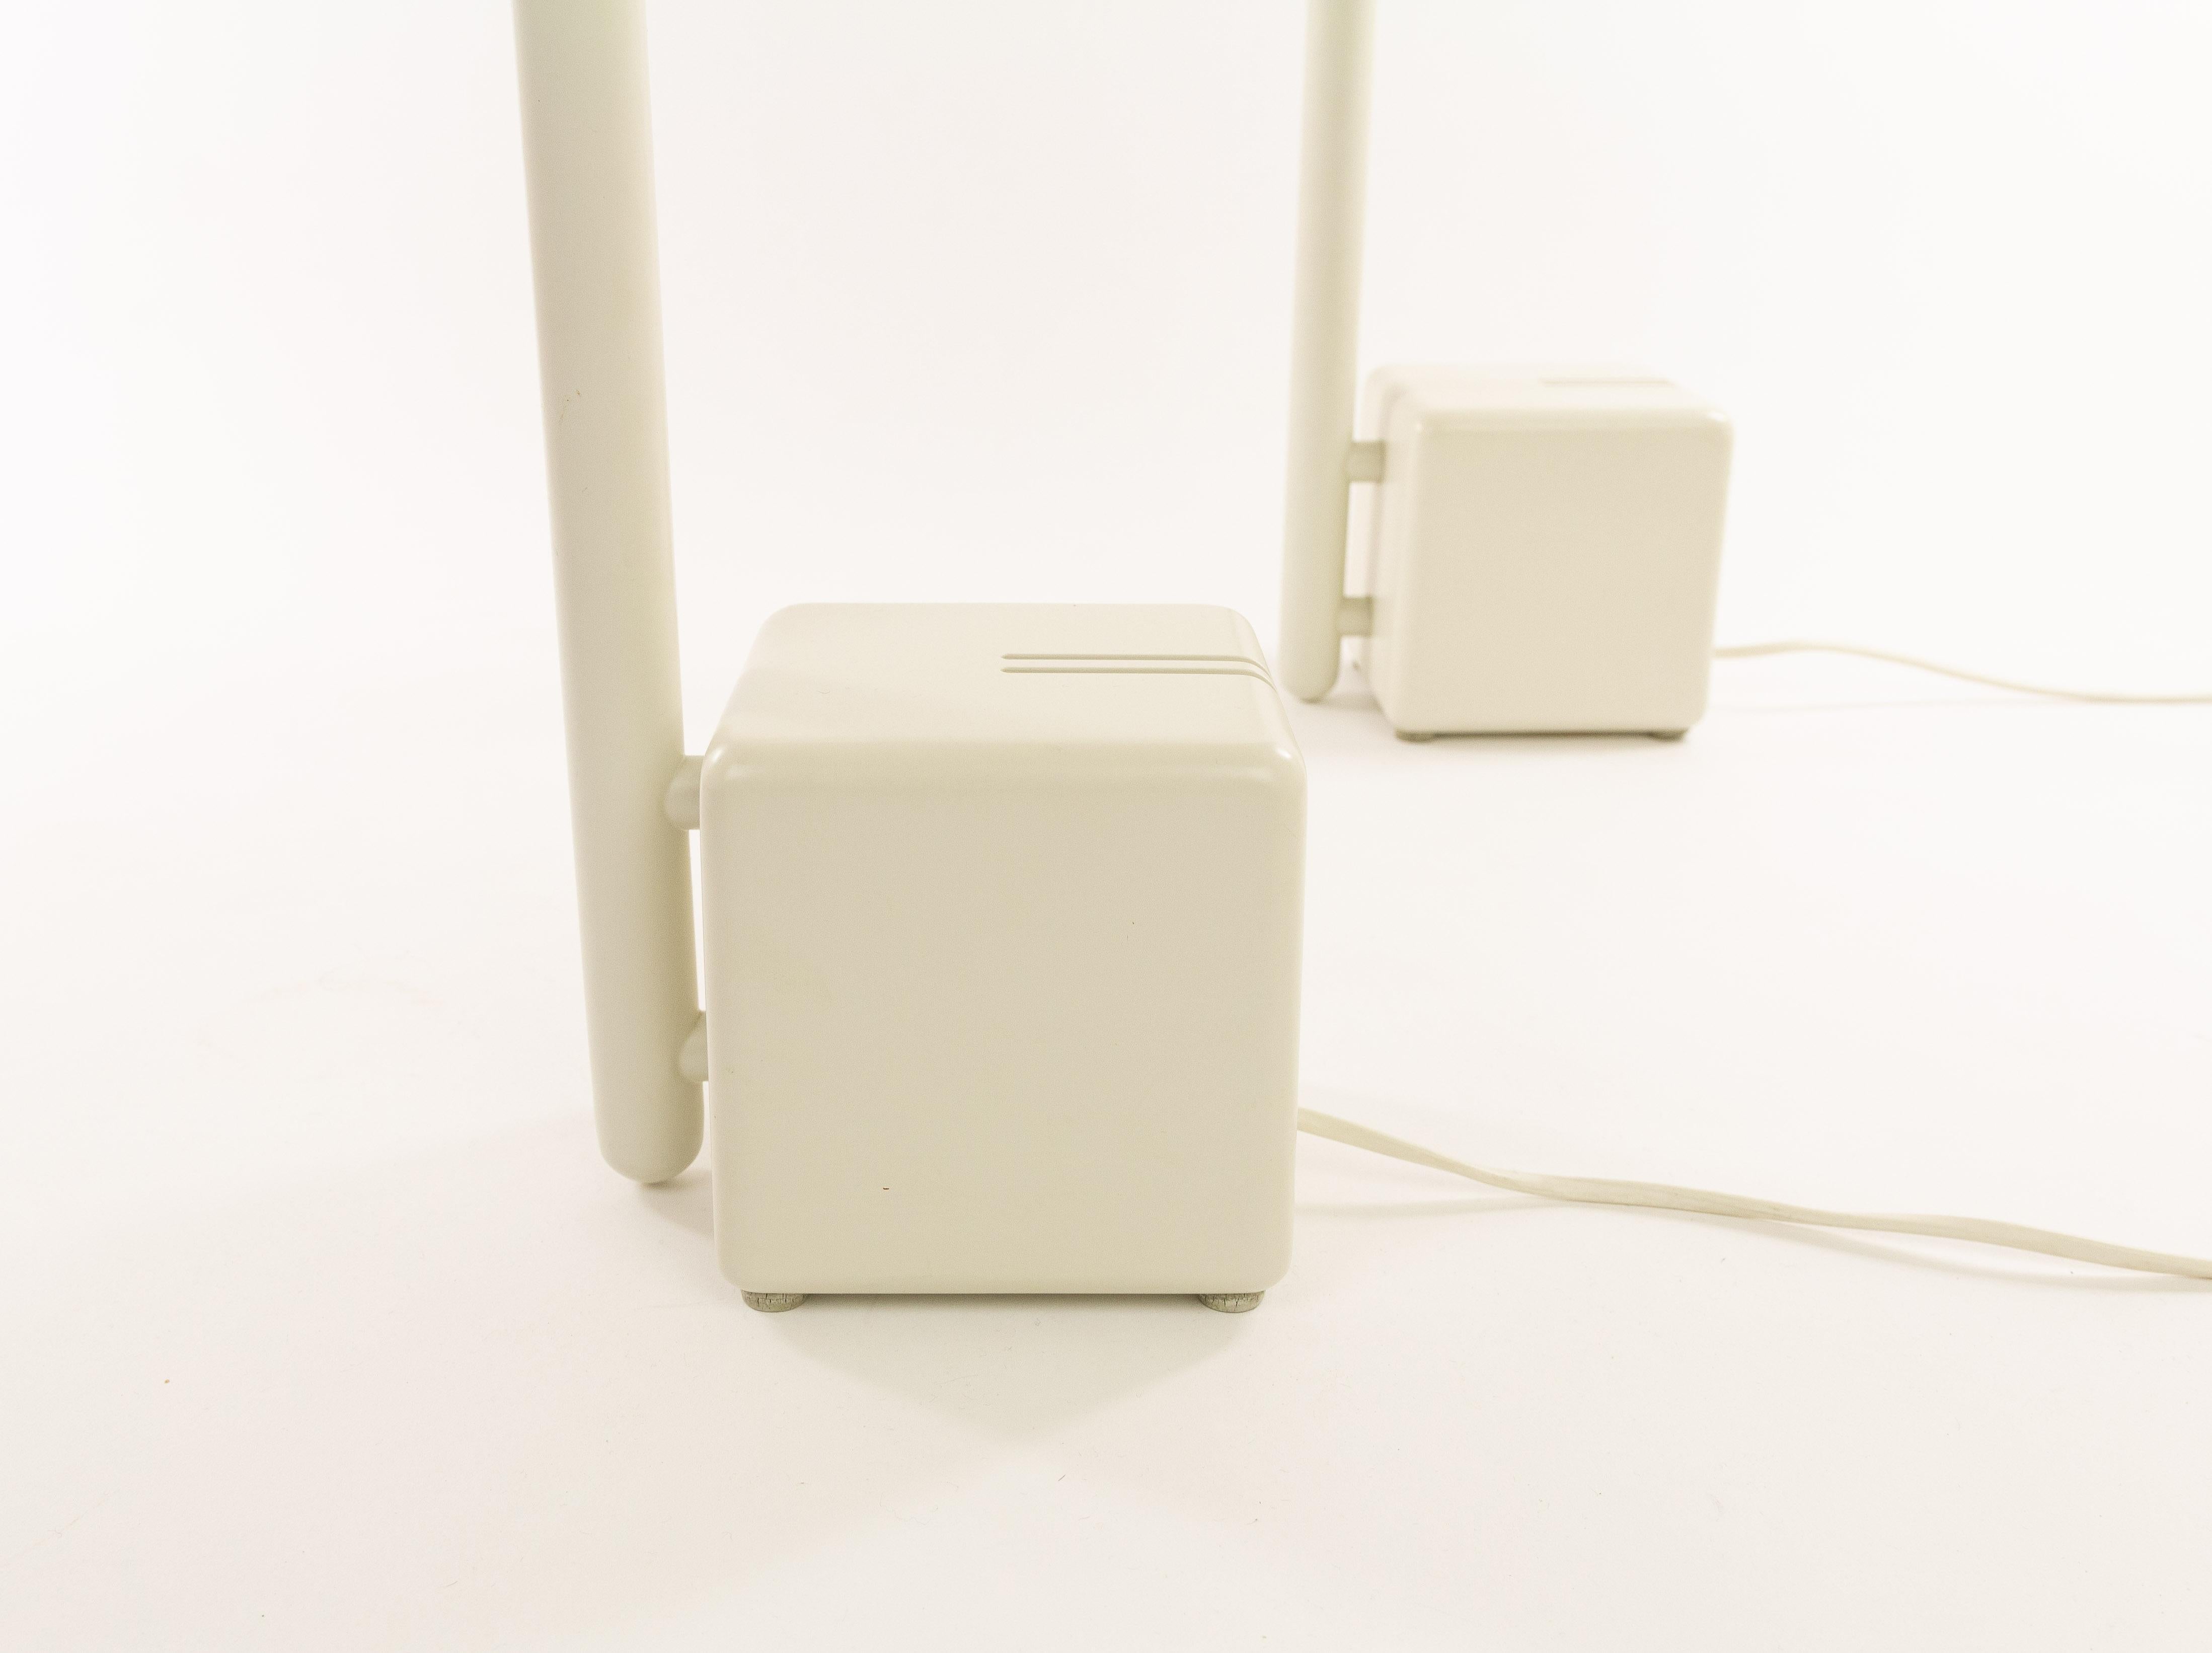 Danish Pair of Table Lamps by Claus Bonderup & Torsten Thorup for Focus, Denmark, 1970 For Sale